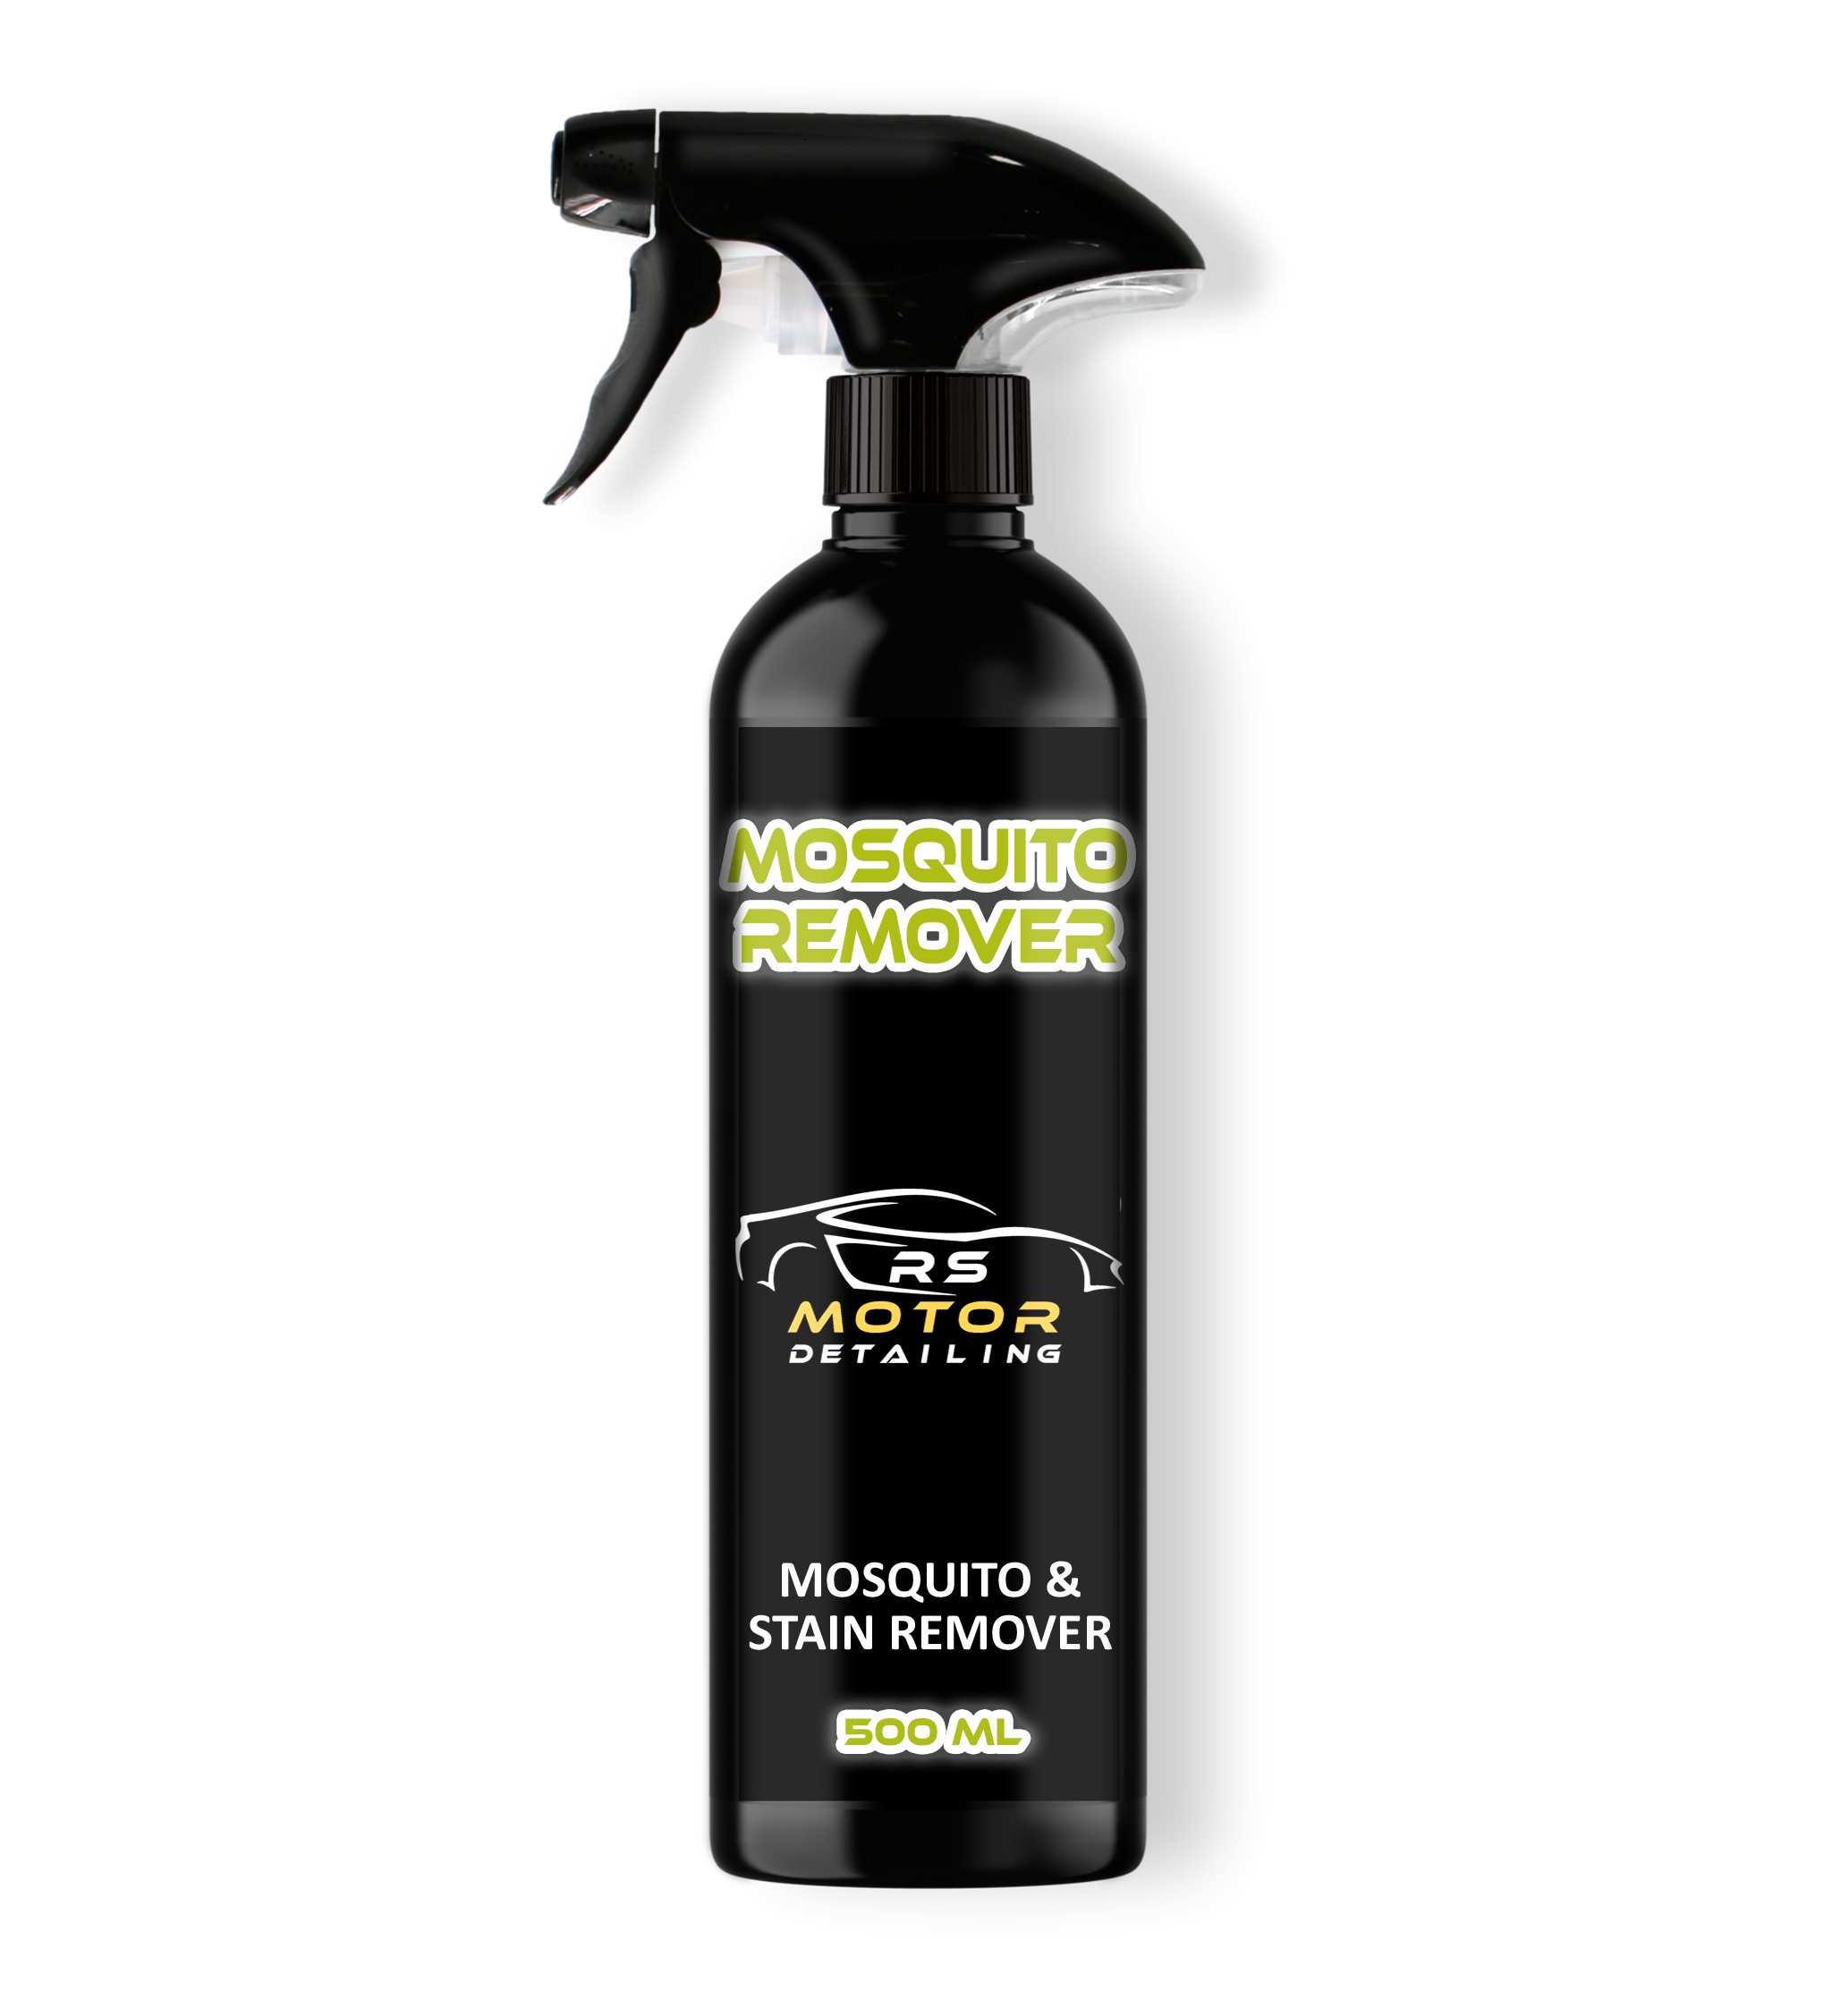 MOSQUITO REMOVER - Insect Cleaner